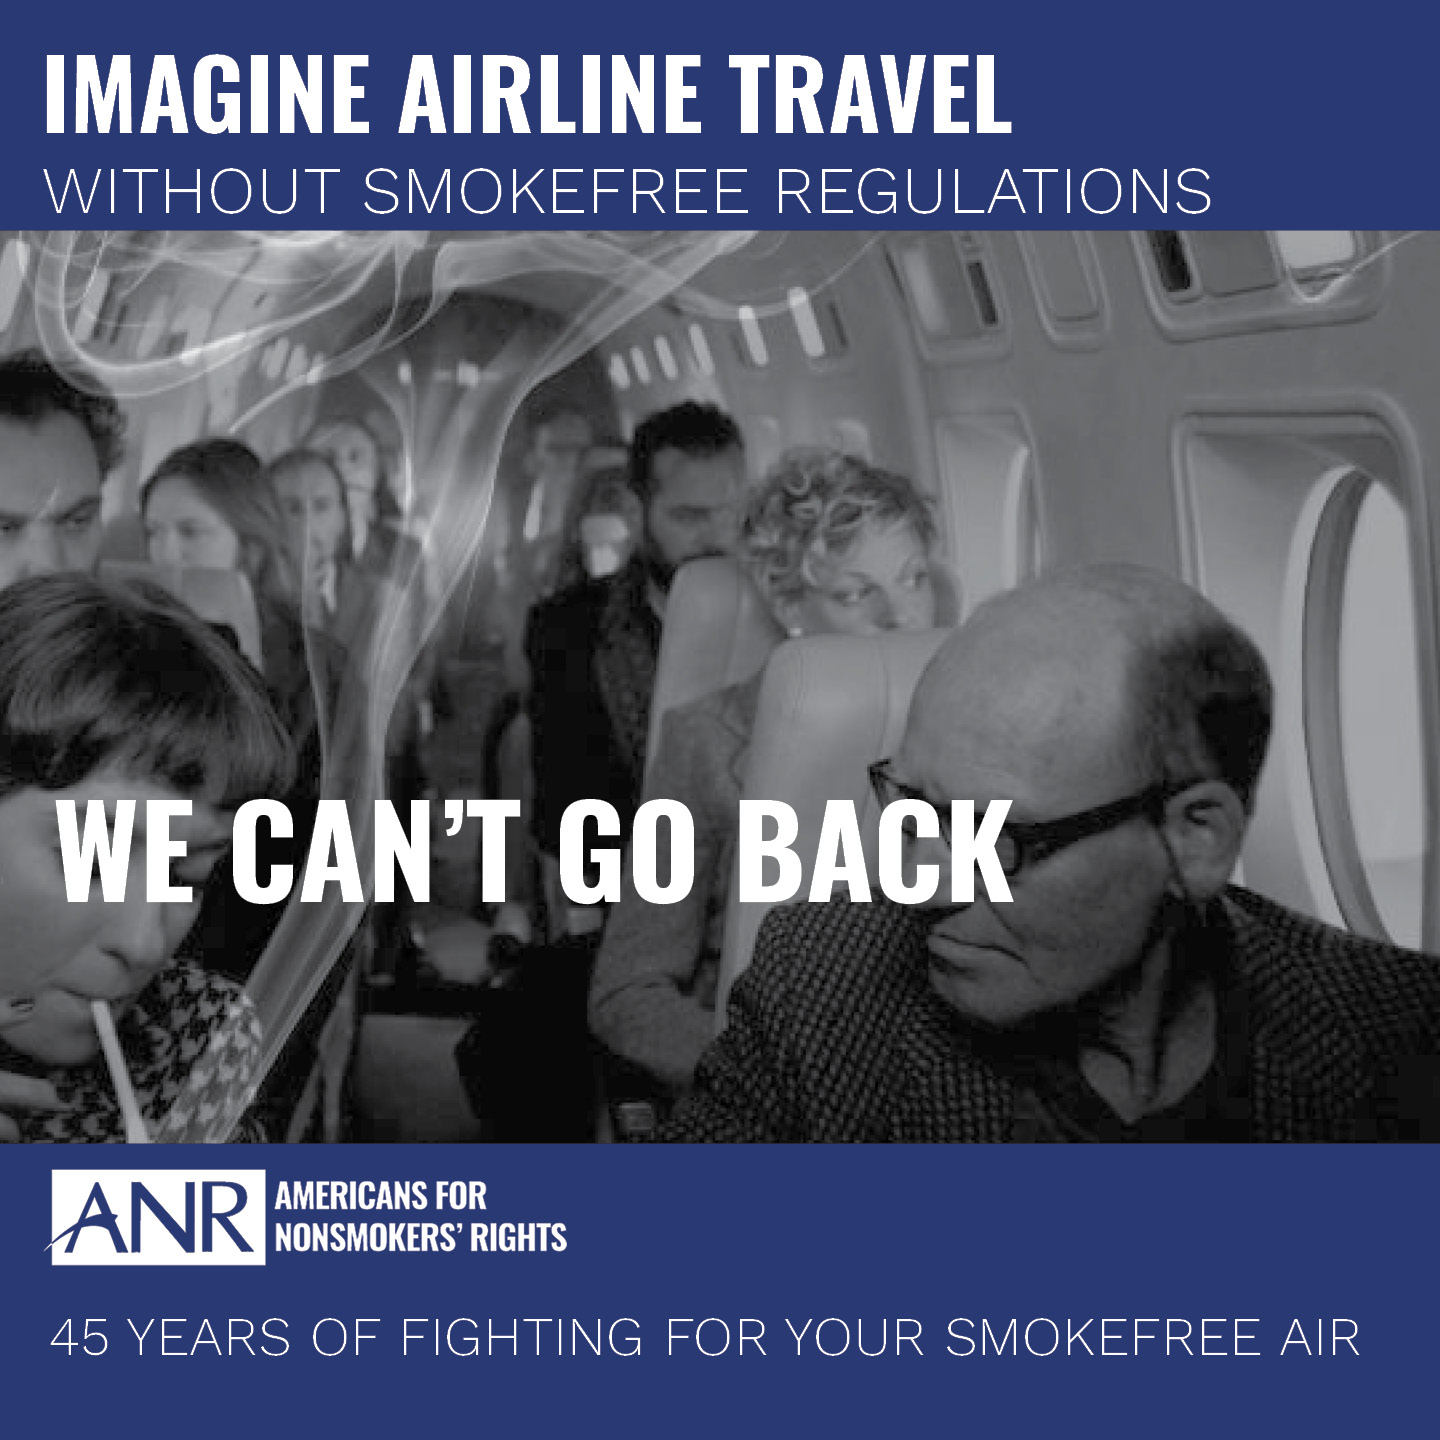 Imagine Airline Travel if there were no smokefree policies?